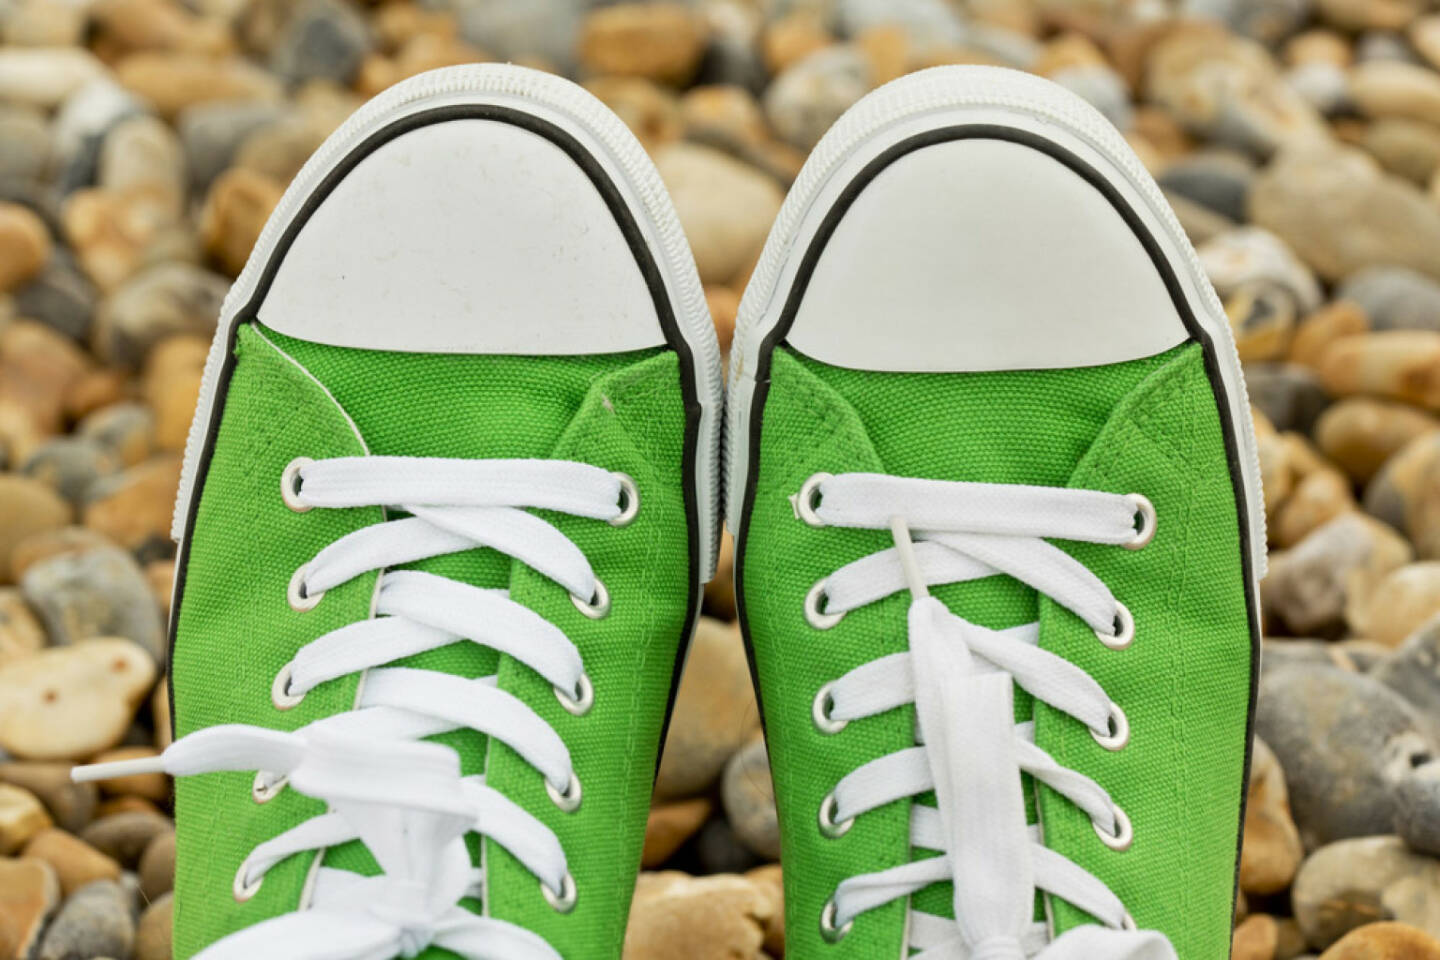 Schuhe, grün, Sneakers, http://www.shutterstock.com/de/pic-201829462/stock-photo-green-new-sneakers-close-up-against-pebble-background.html 